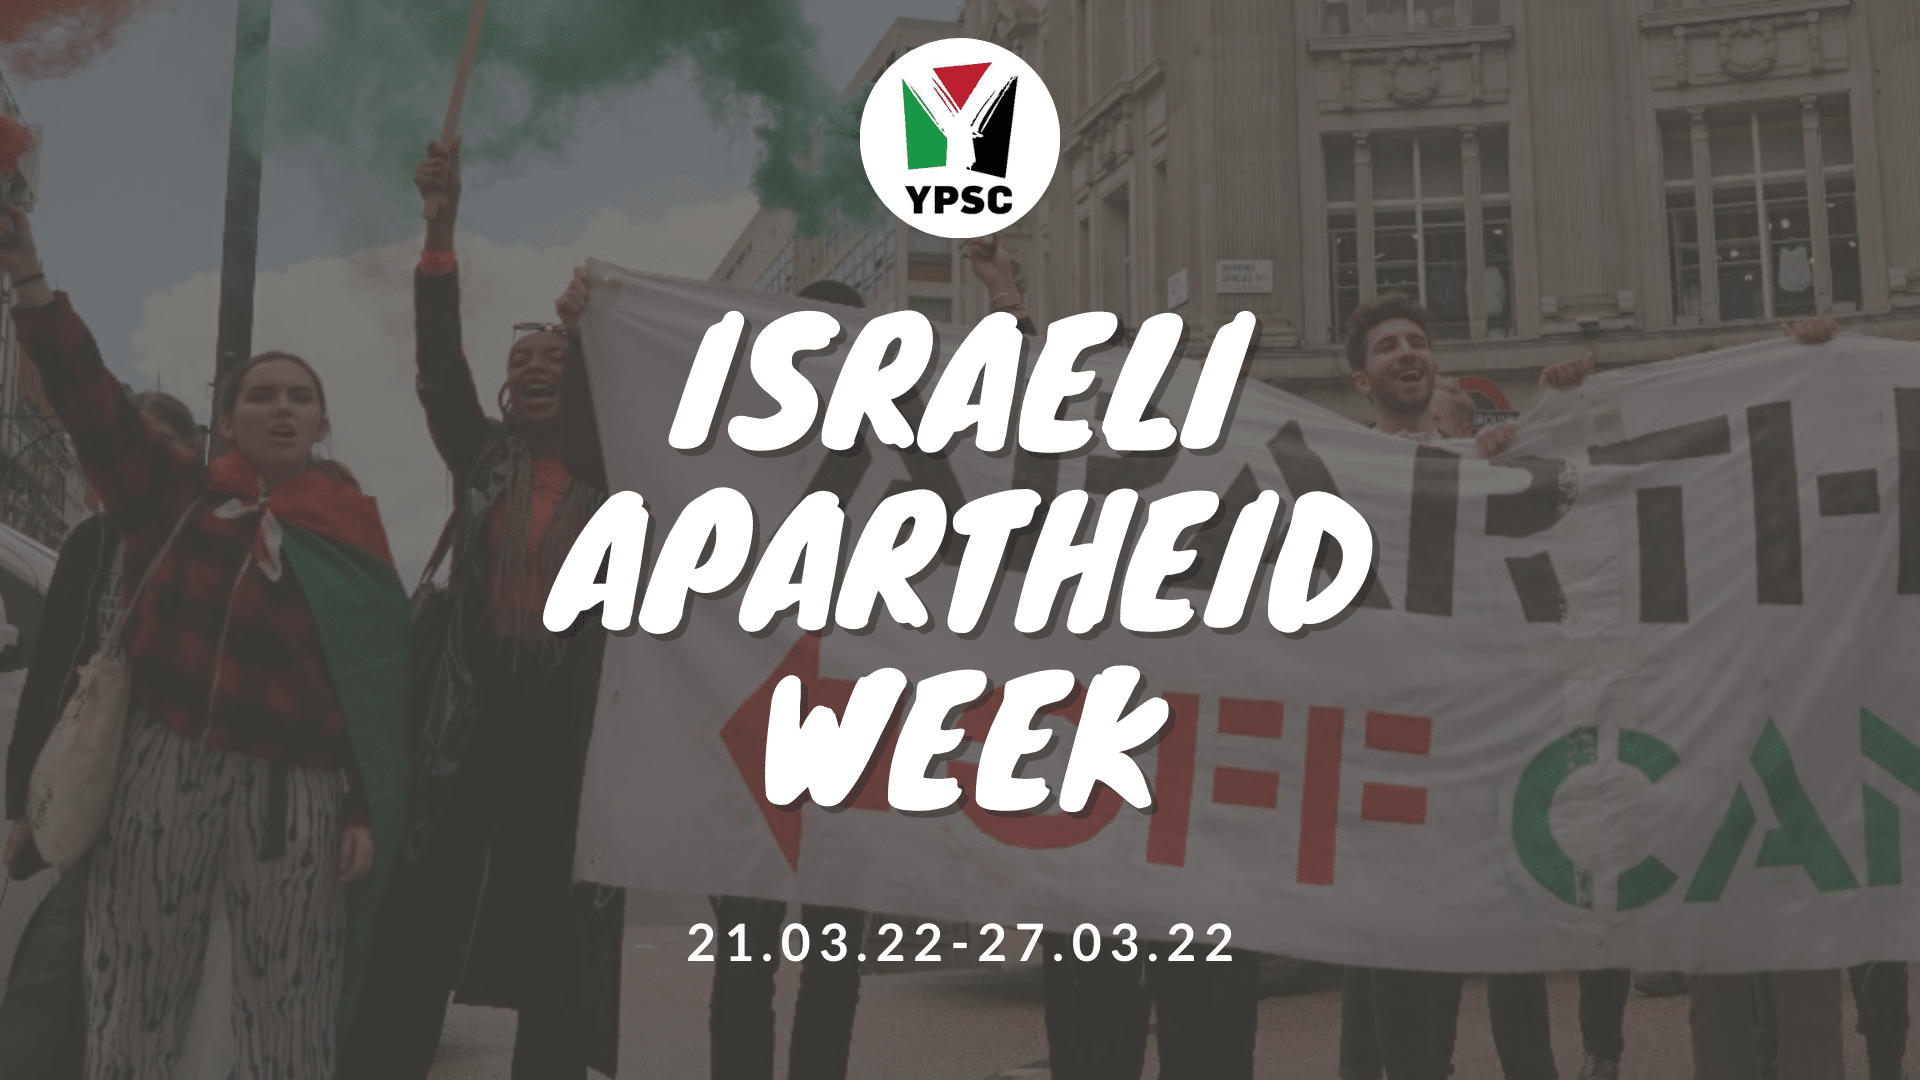 Photograph of students holding a banner overlaid with the text 'Israeli Apartheid Week'